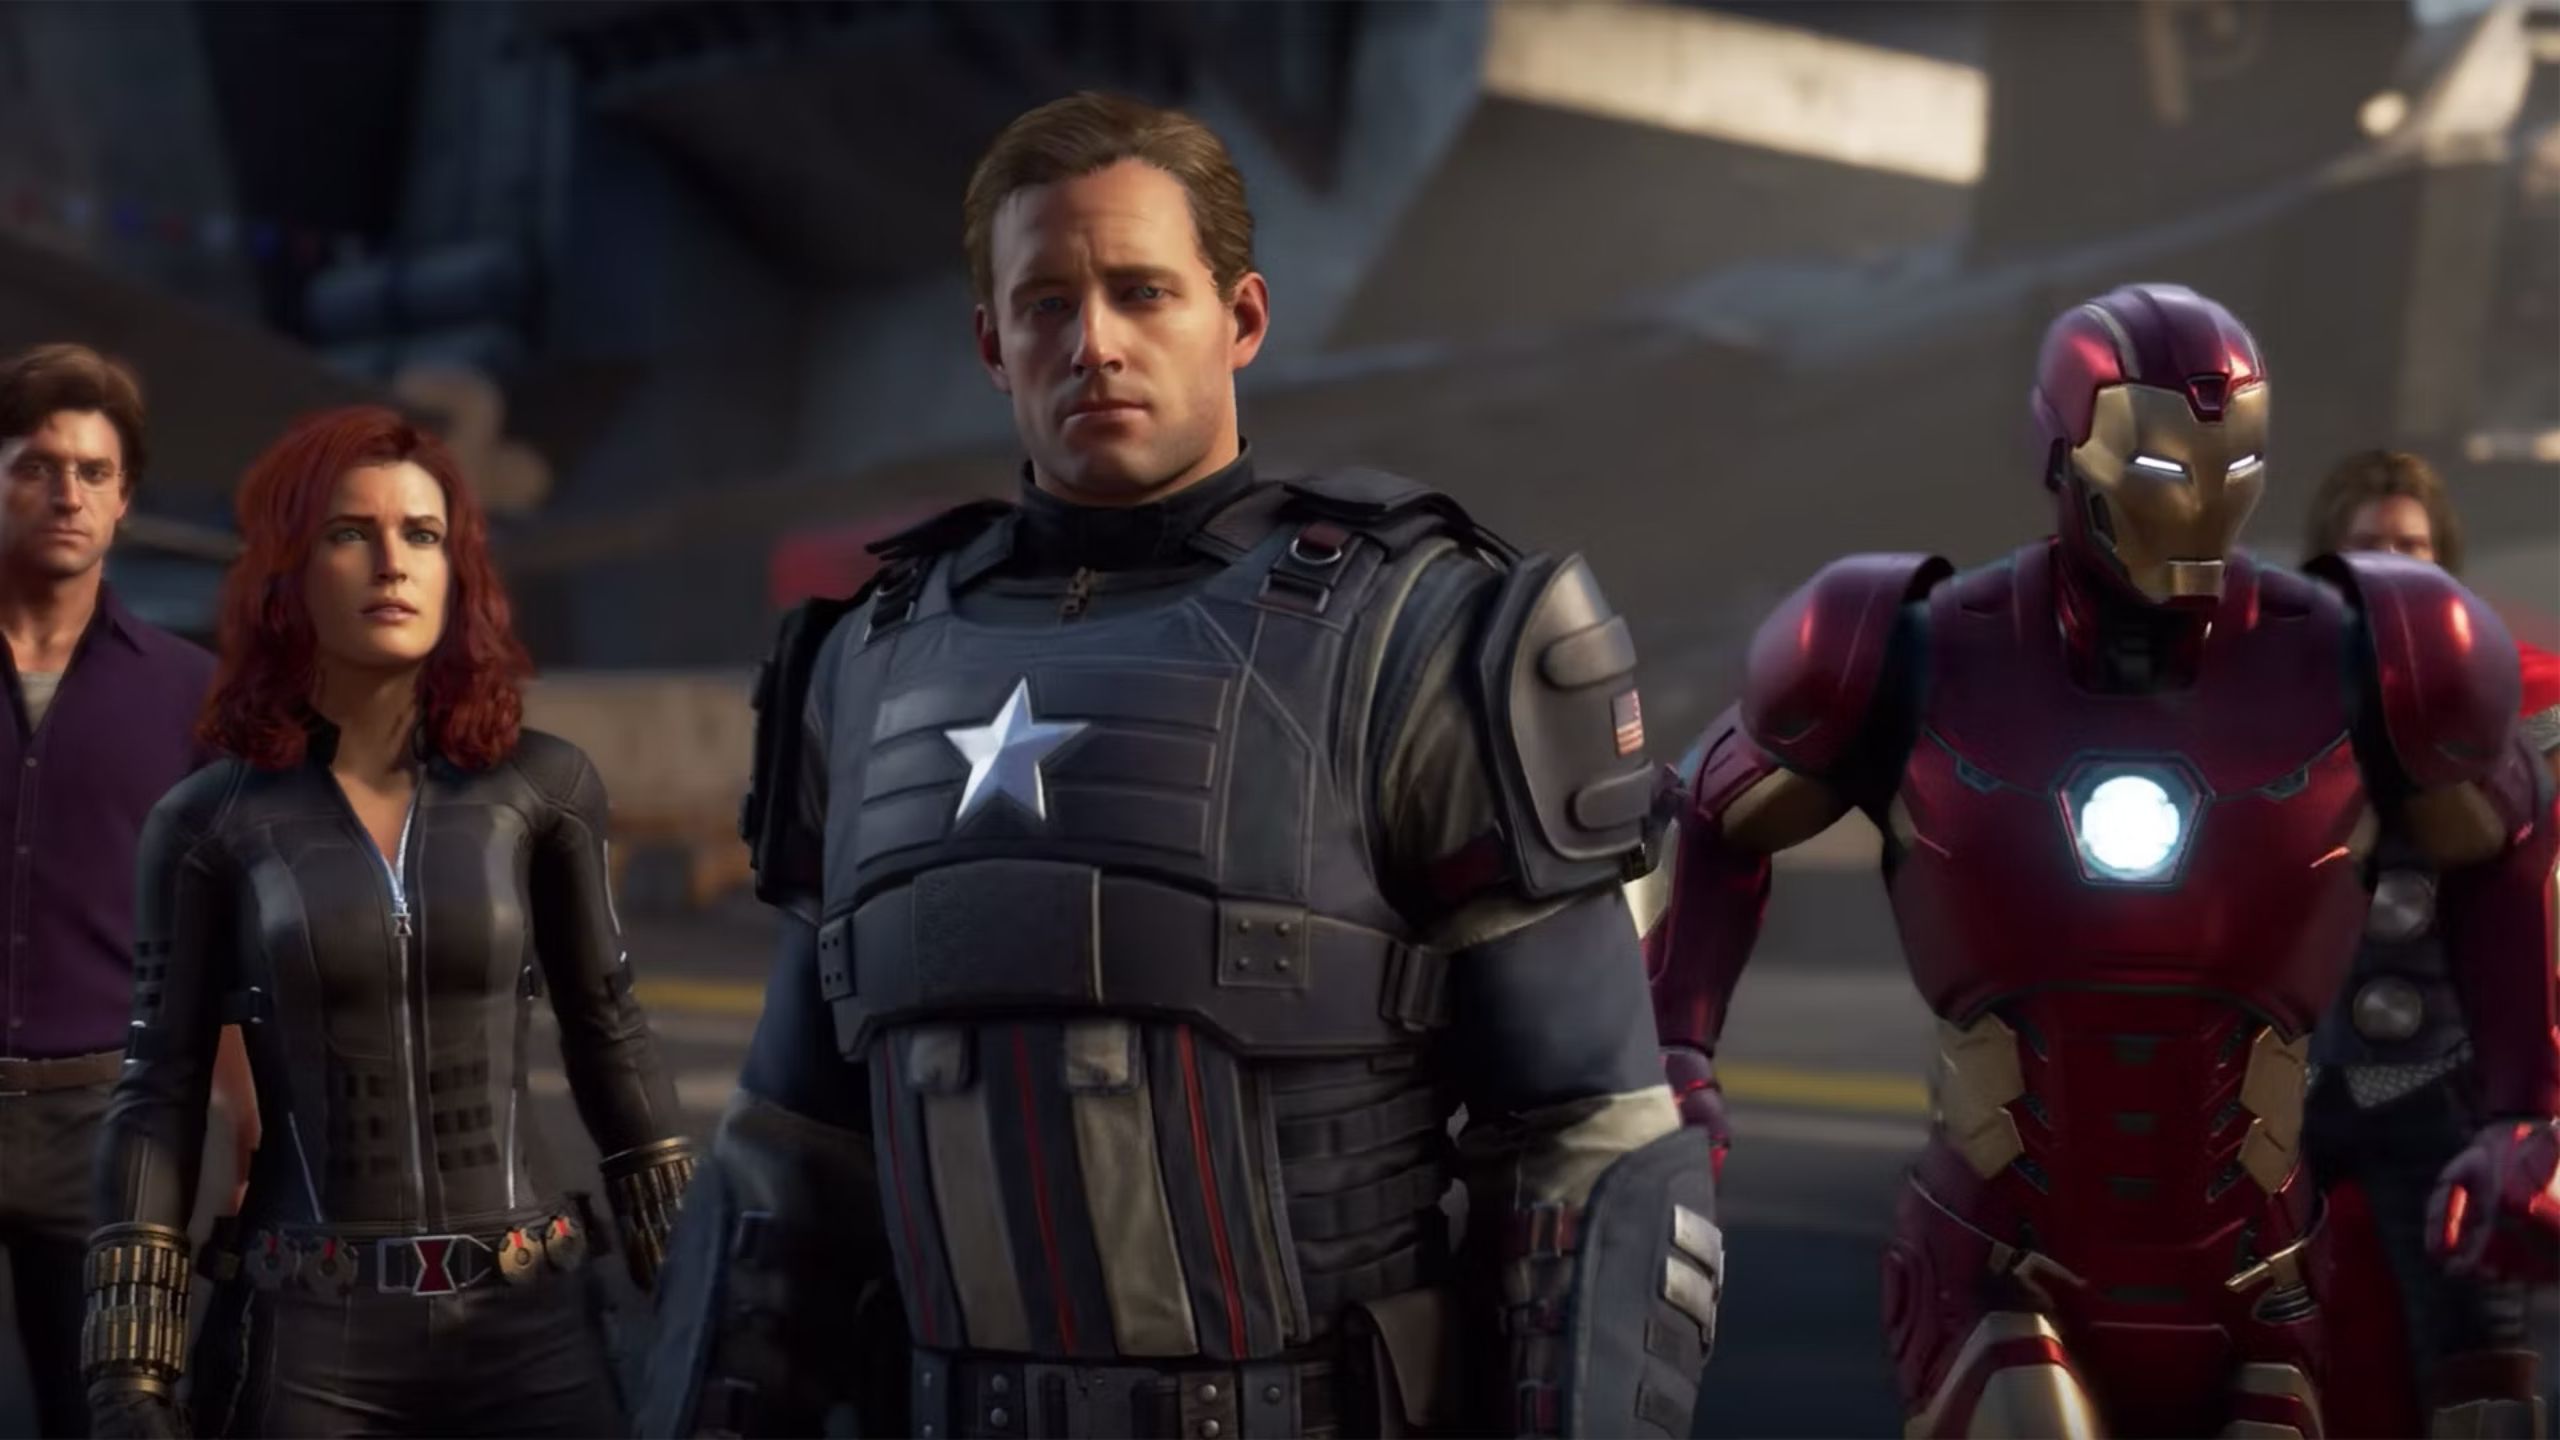 Marvel's Avengers from Square Enix